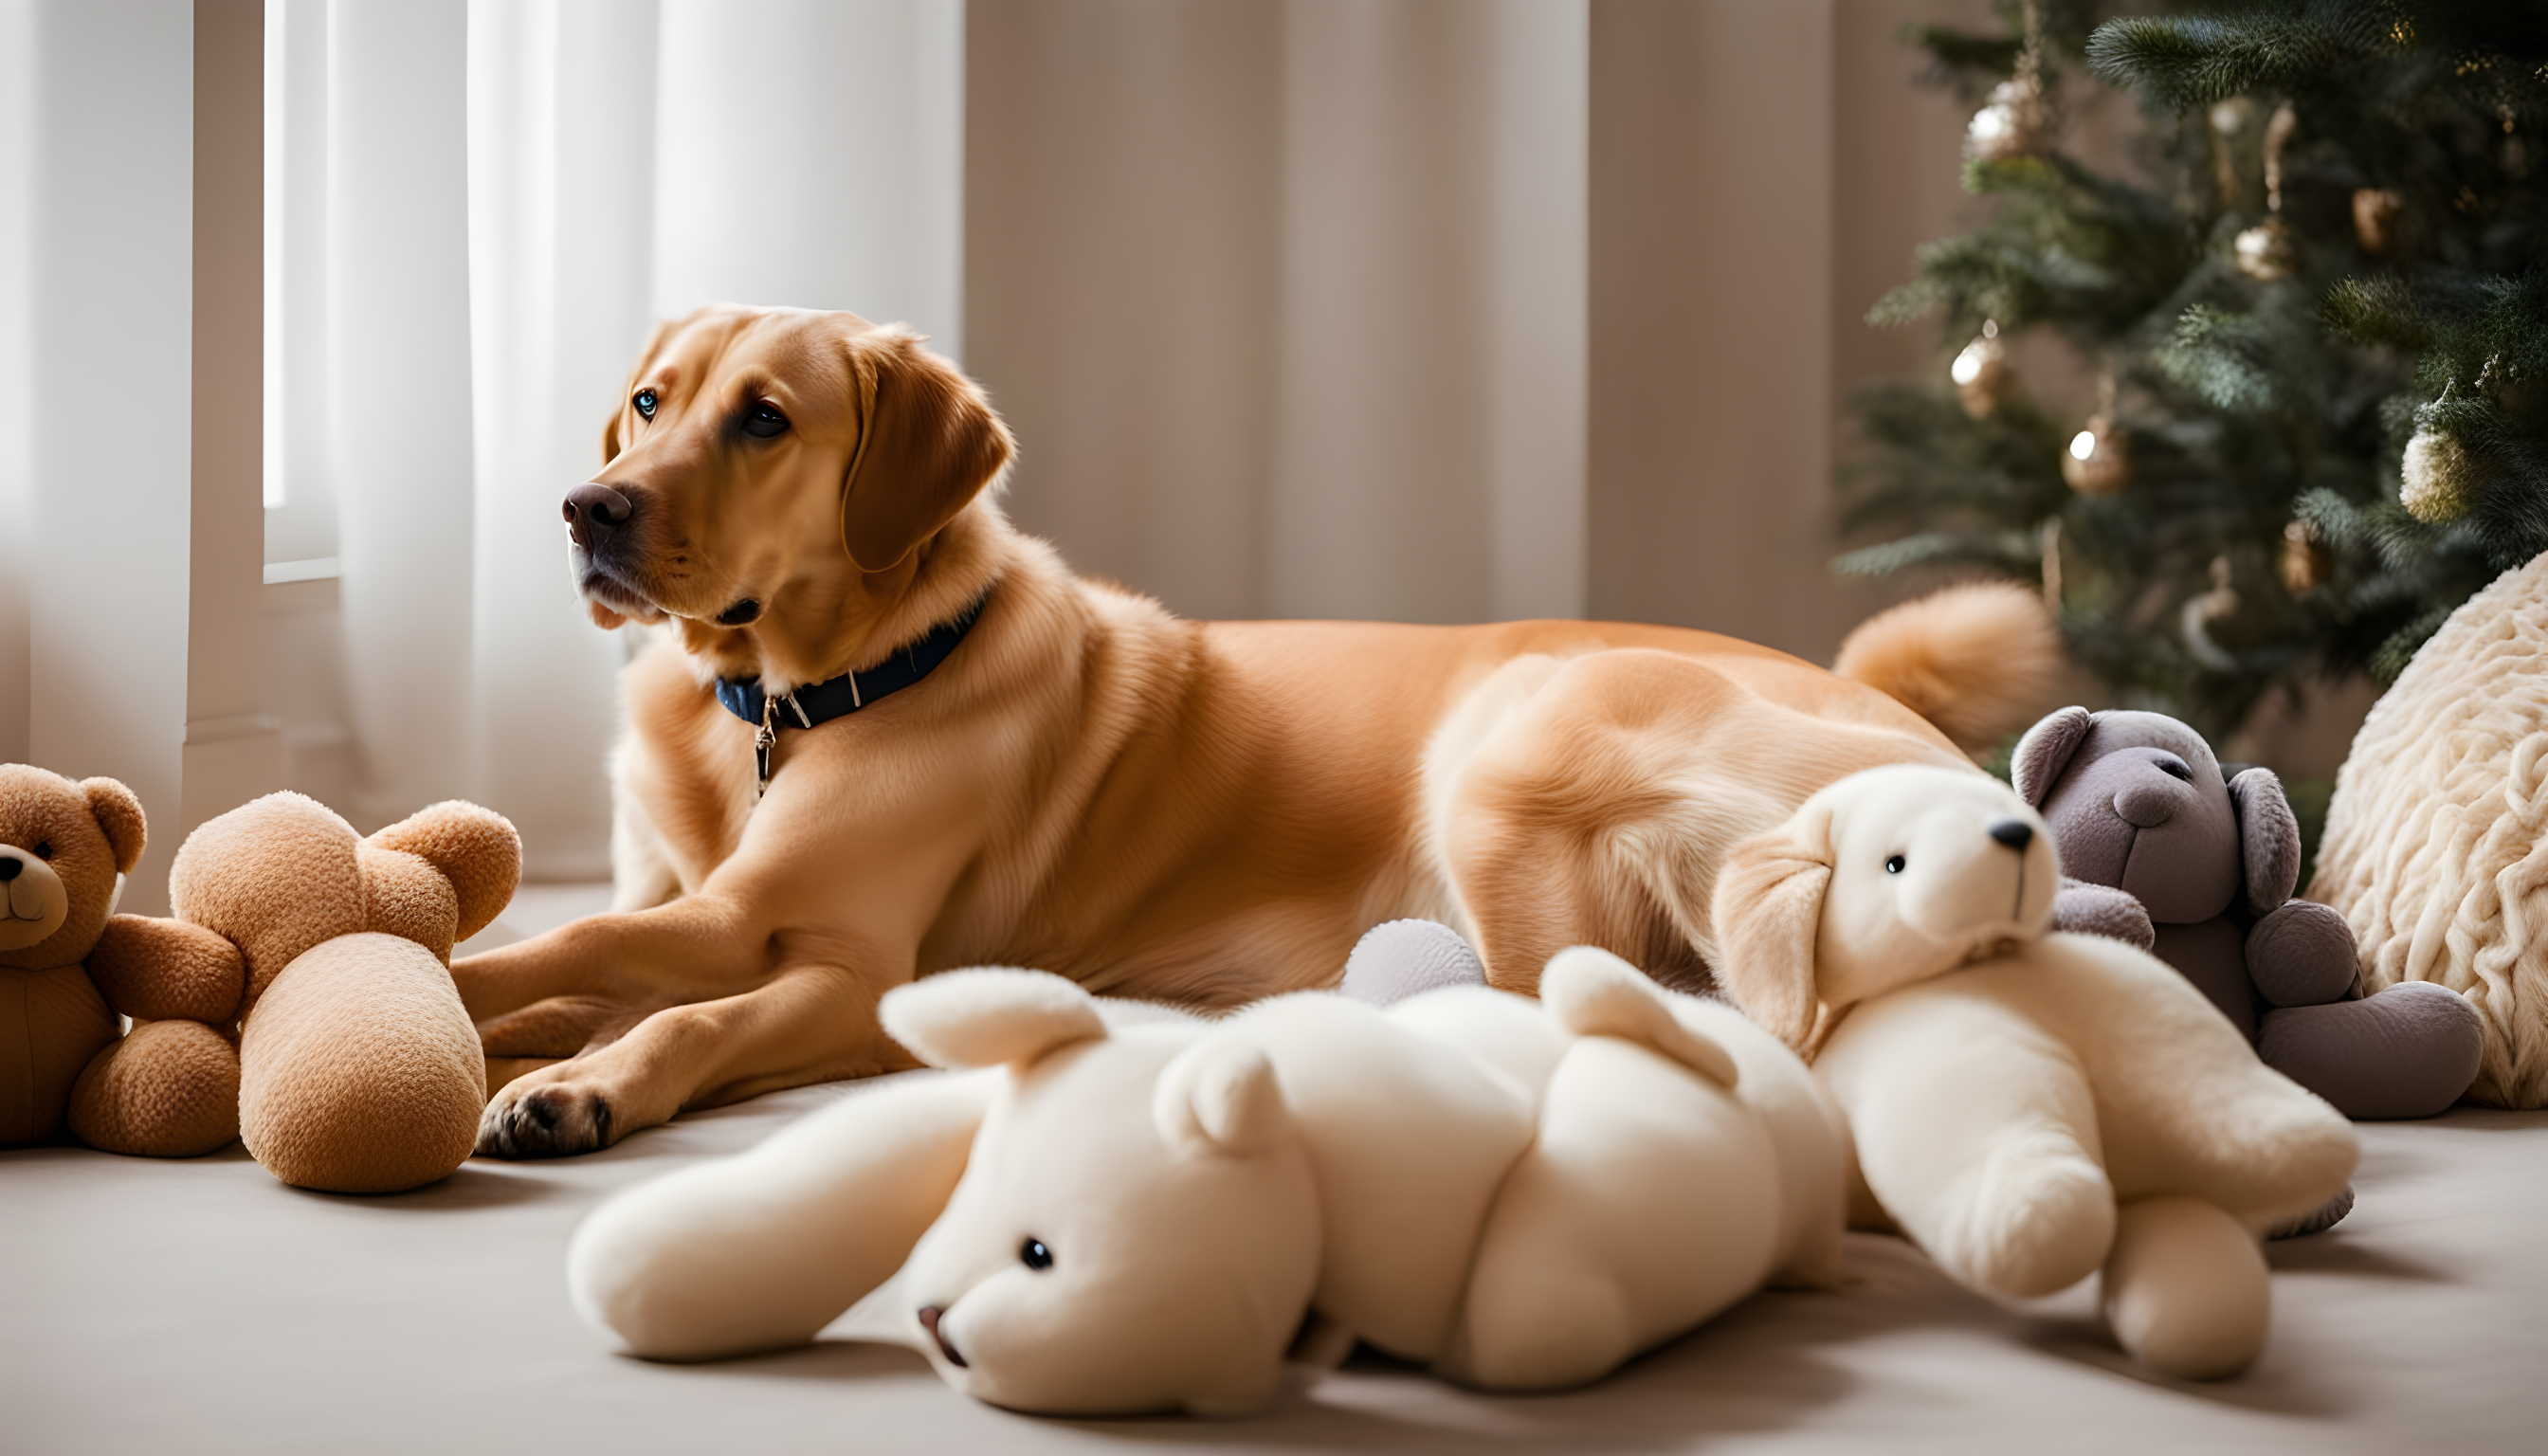 British Lab lounging on a silk cushion, surrounded by plush toys.